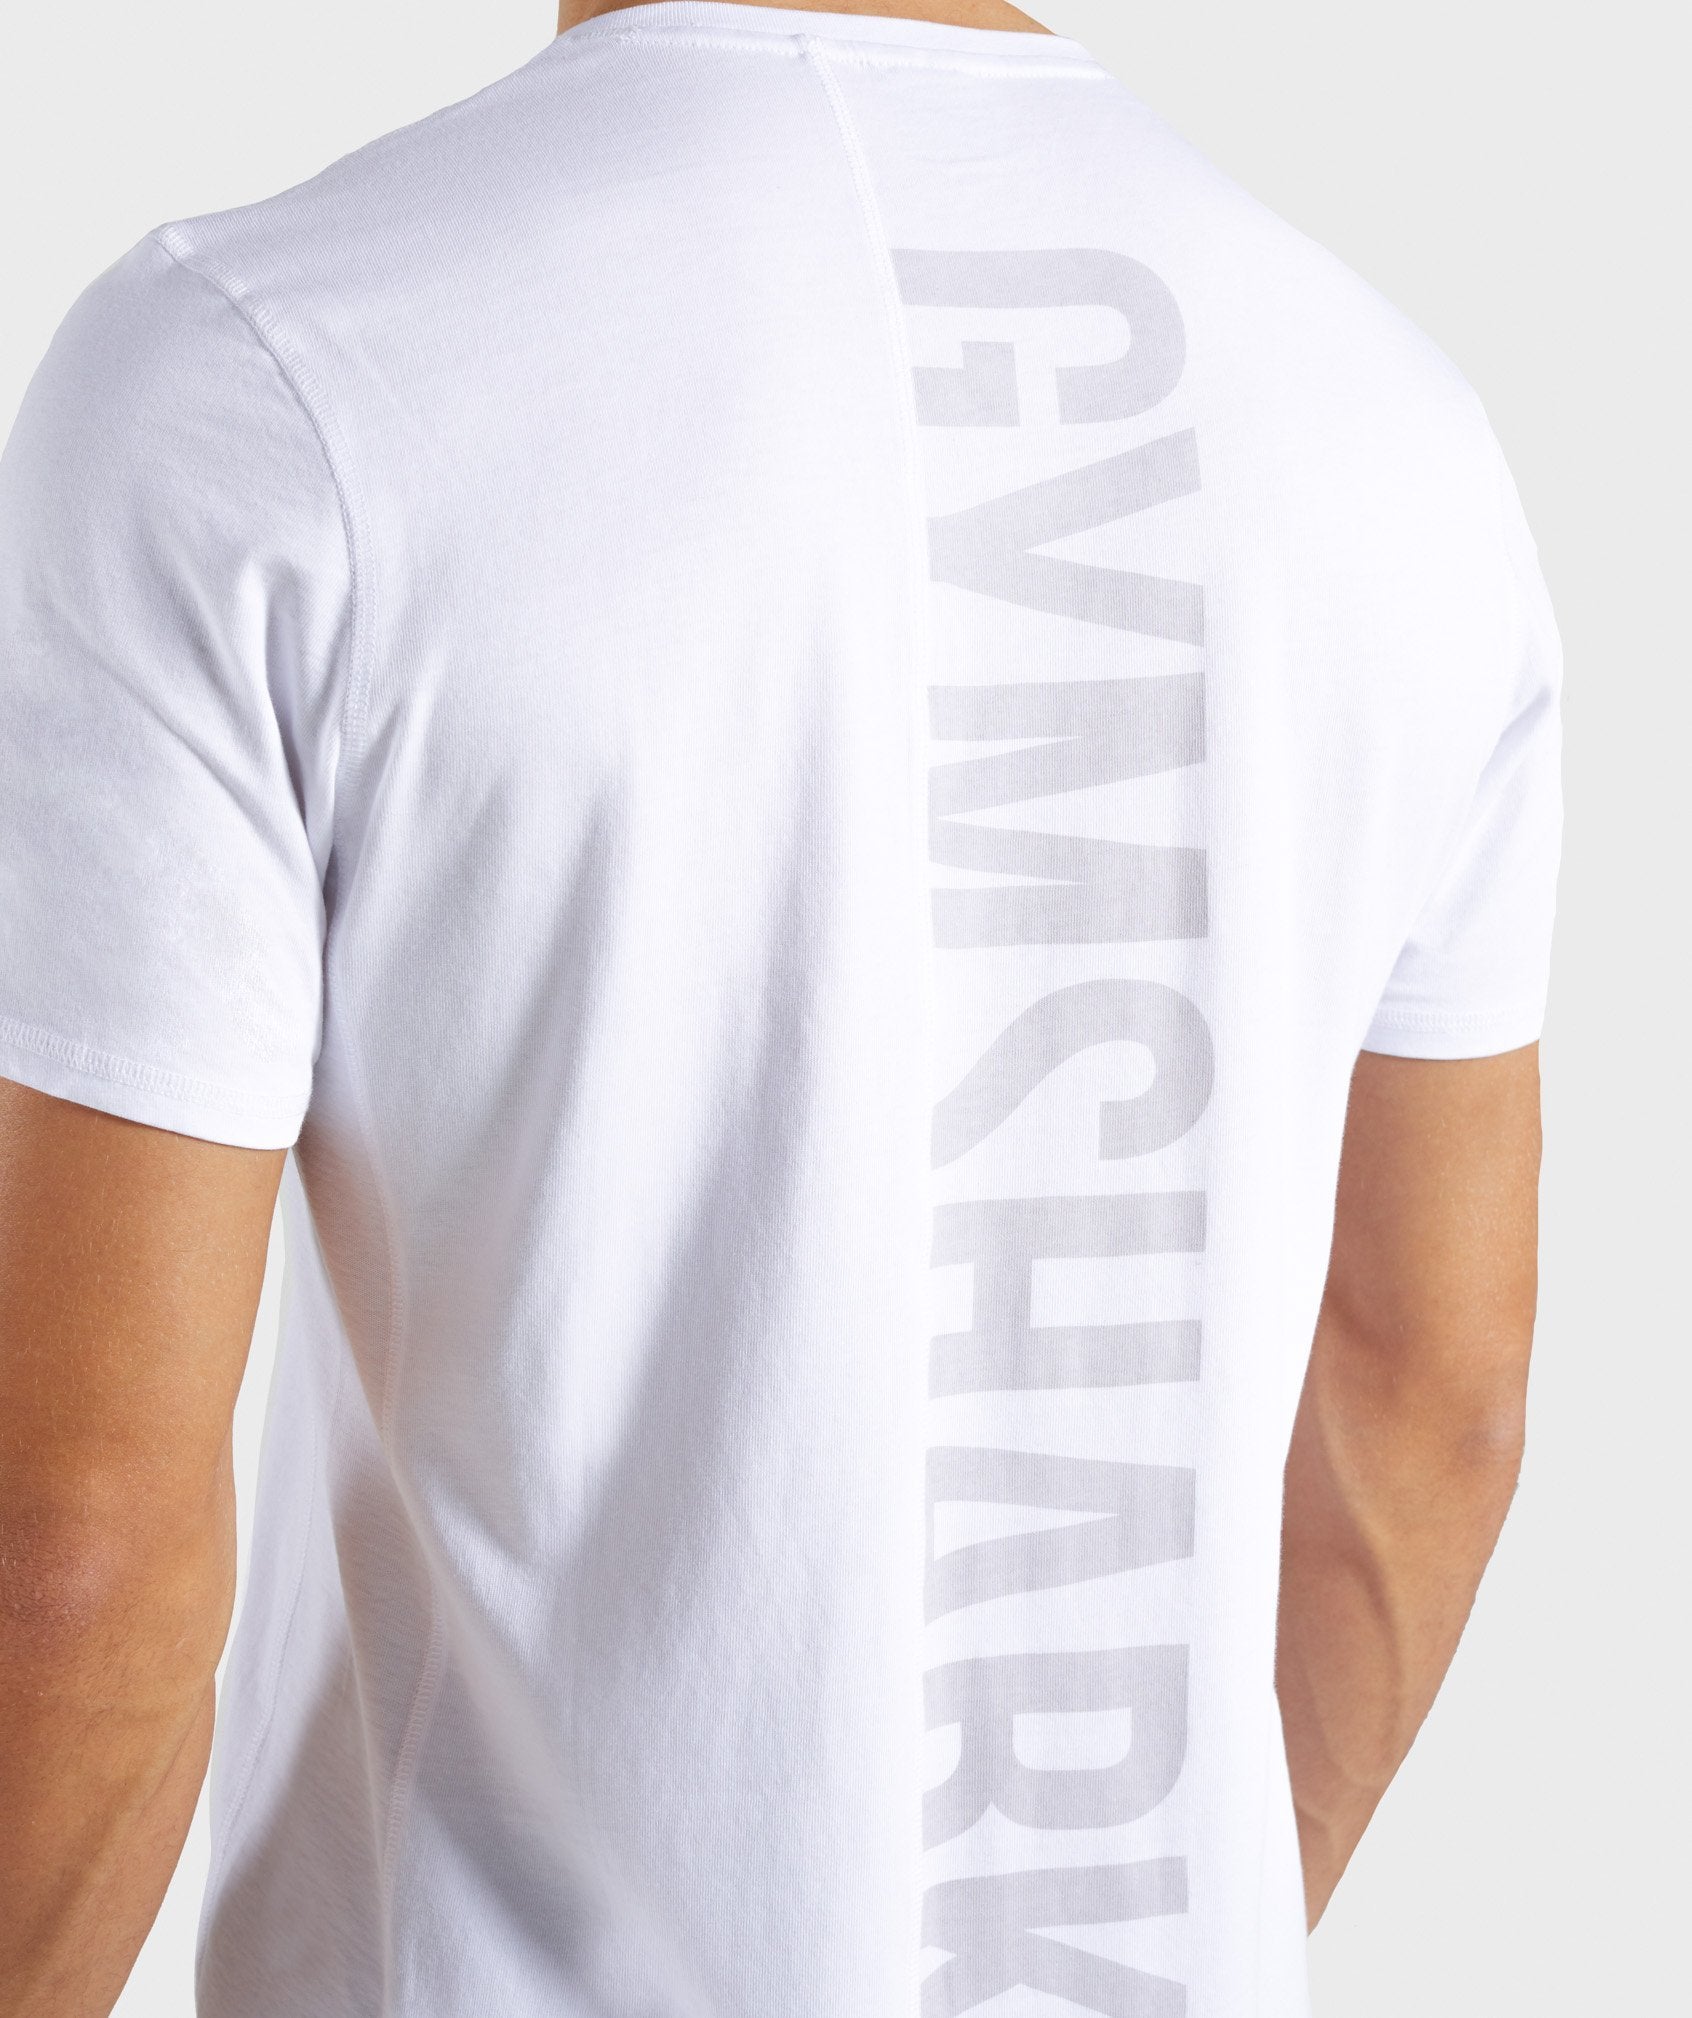 Laundered T-Shirt in White - view 4